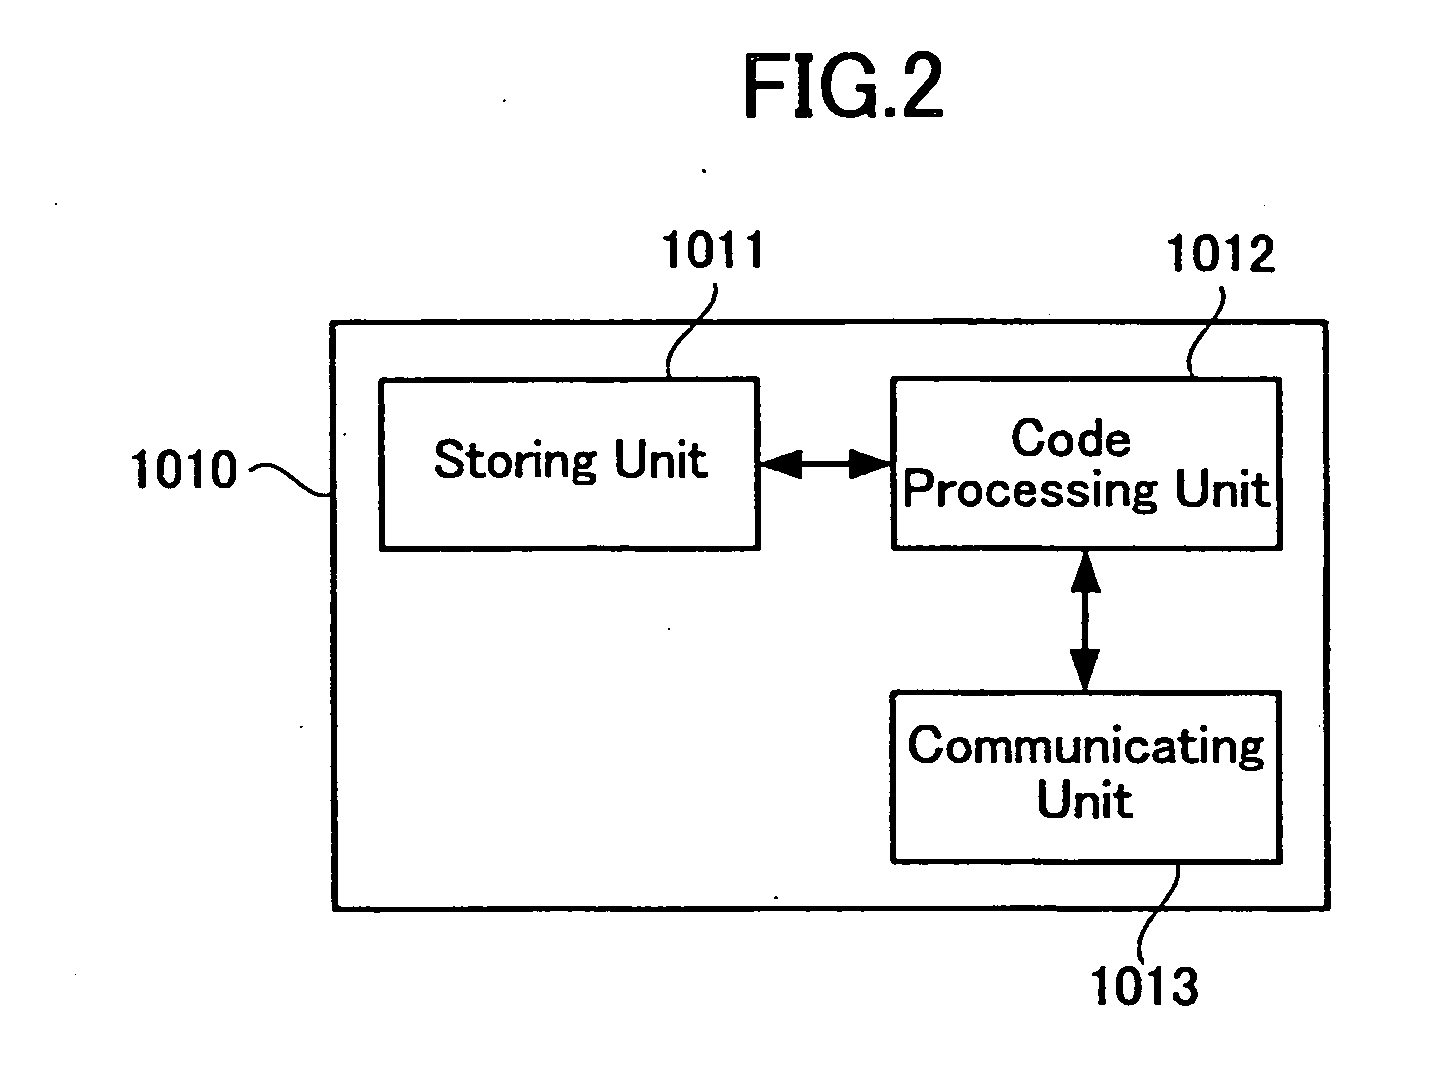 Authentication apparatus, electronic driver's license, and authentication system